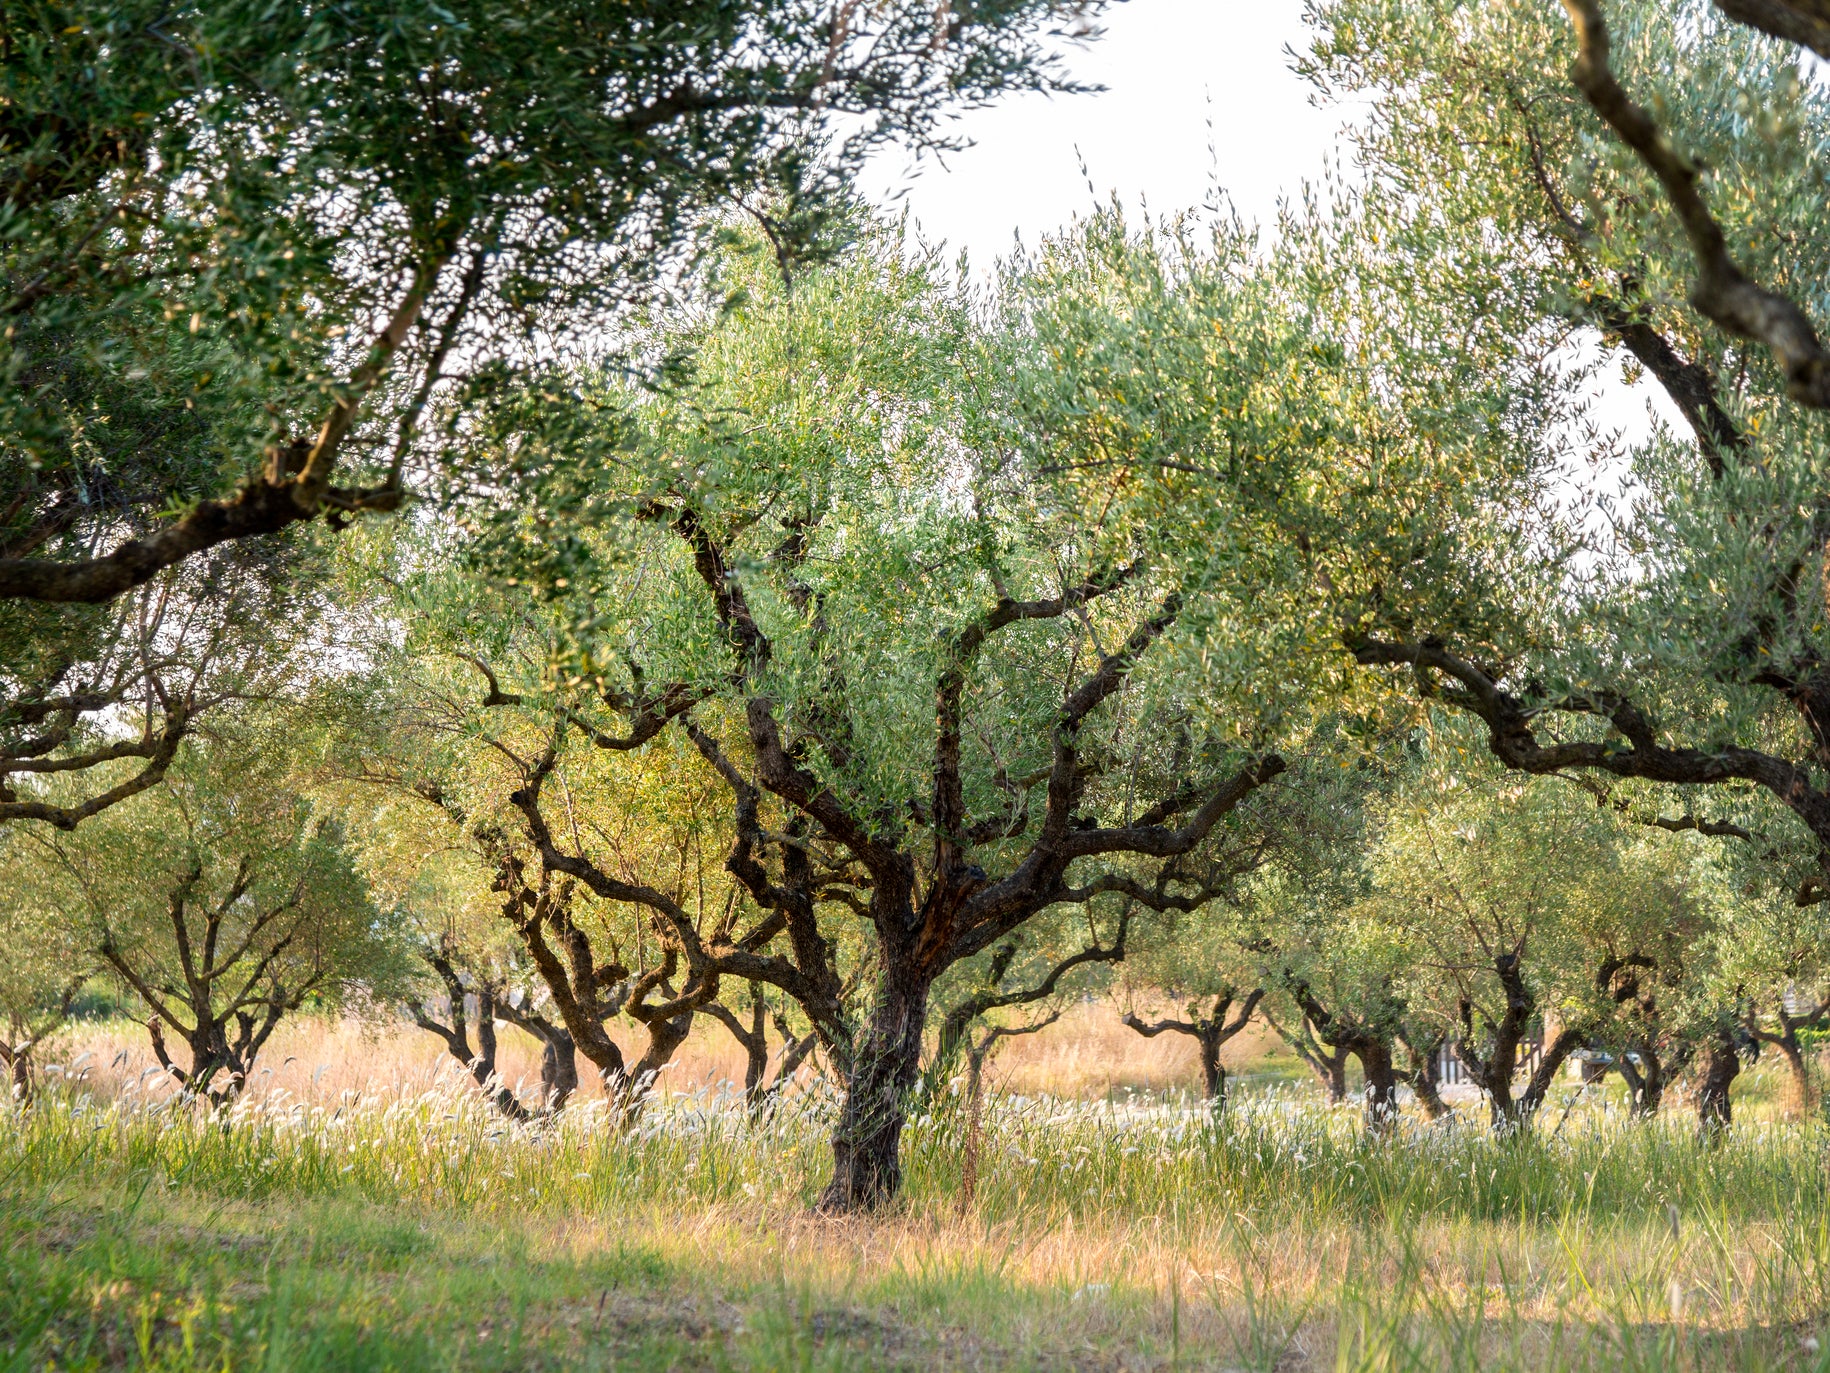 Many ancient Italian olive groves have already been ravaged by the bacterial disease